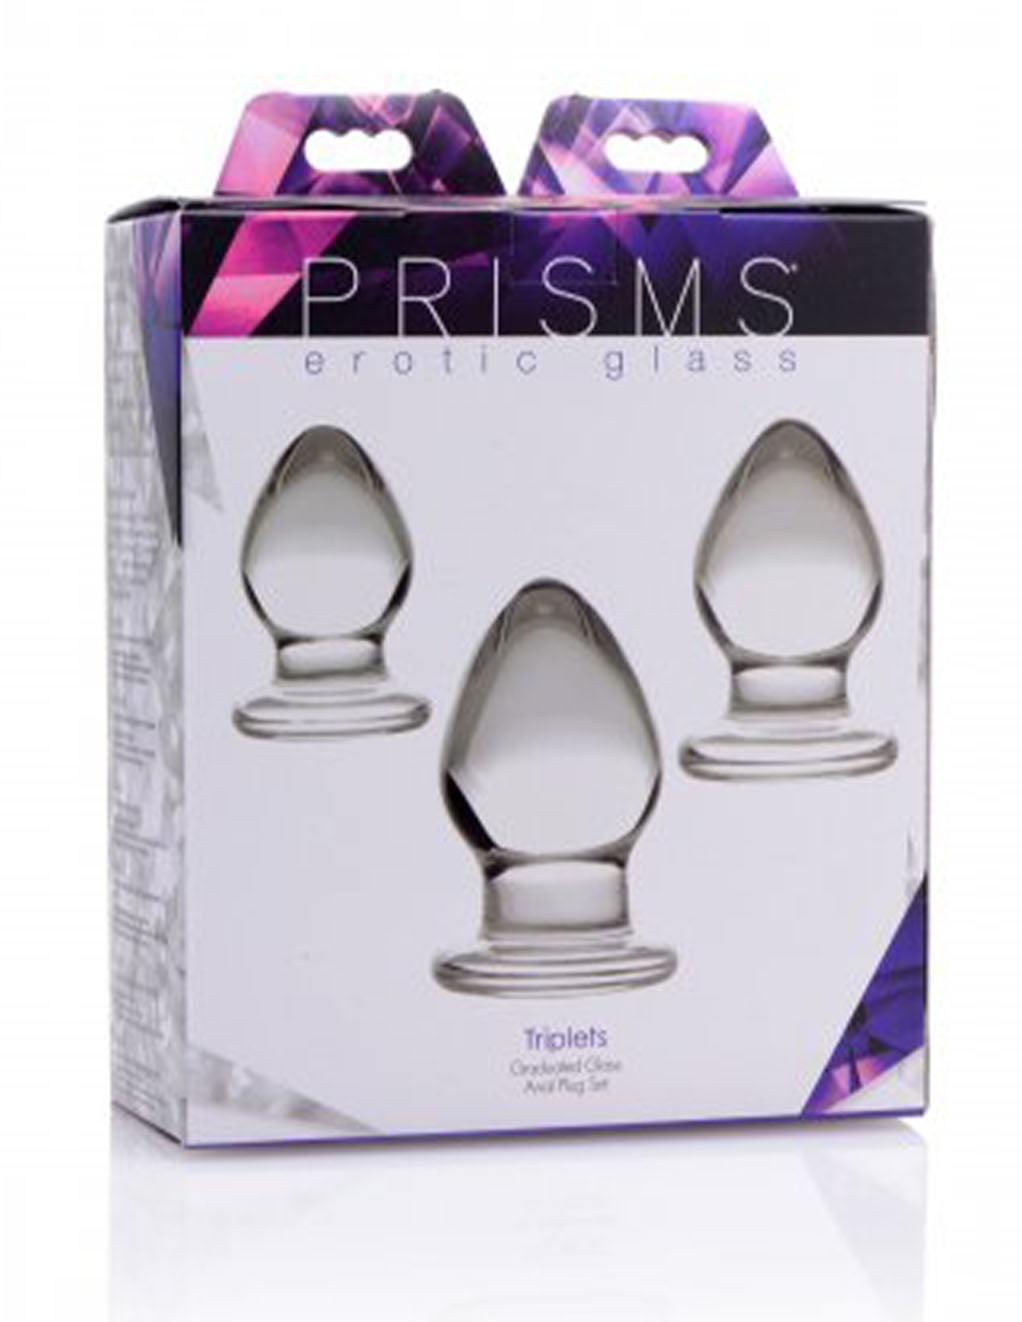 Prisms Erotic Glass Triplets 3 Piece Glass Anal Plug Kit- Package